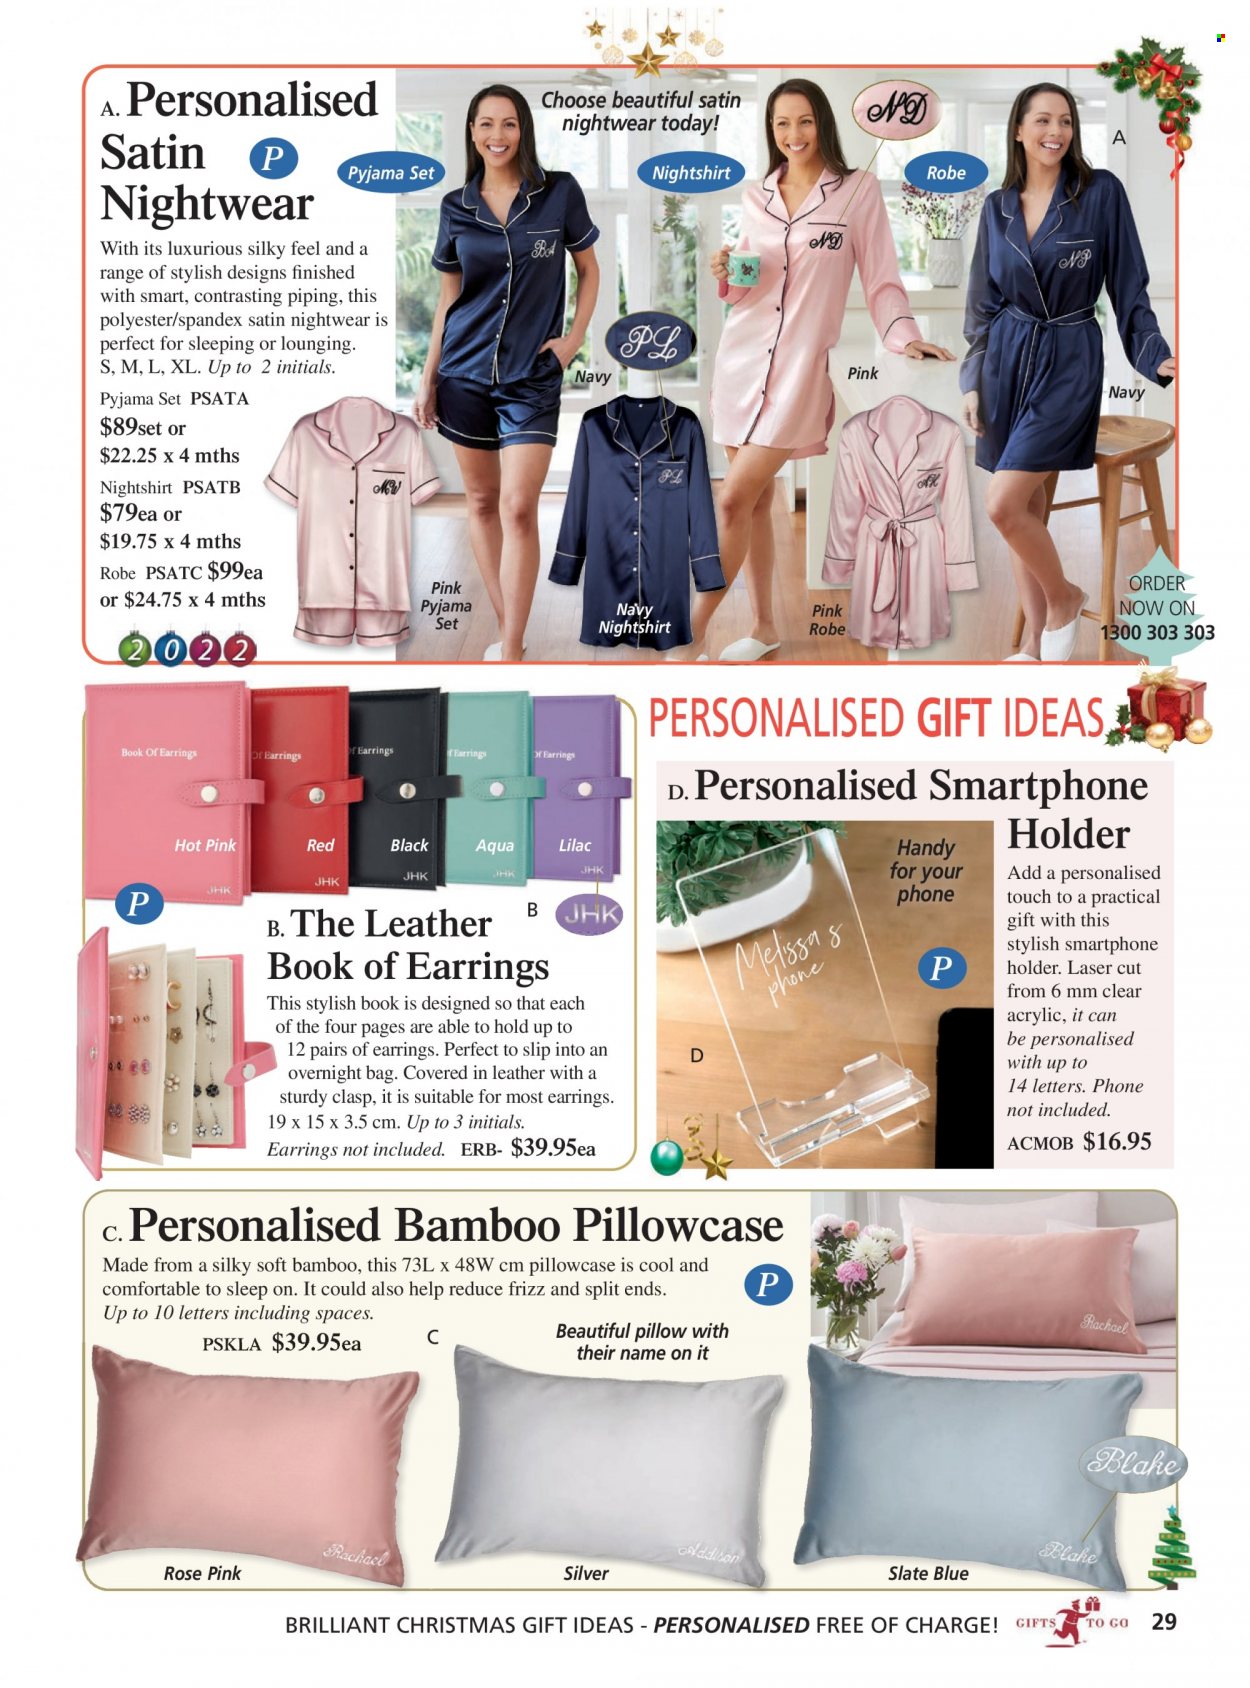 thumbnail - Innovations Catalogue - Sales products - book, pillow, pillowcase, costume, earrings, robe, pajamas. Page 29.